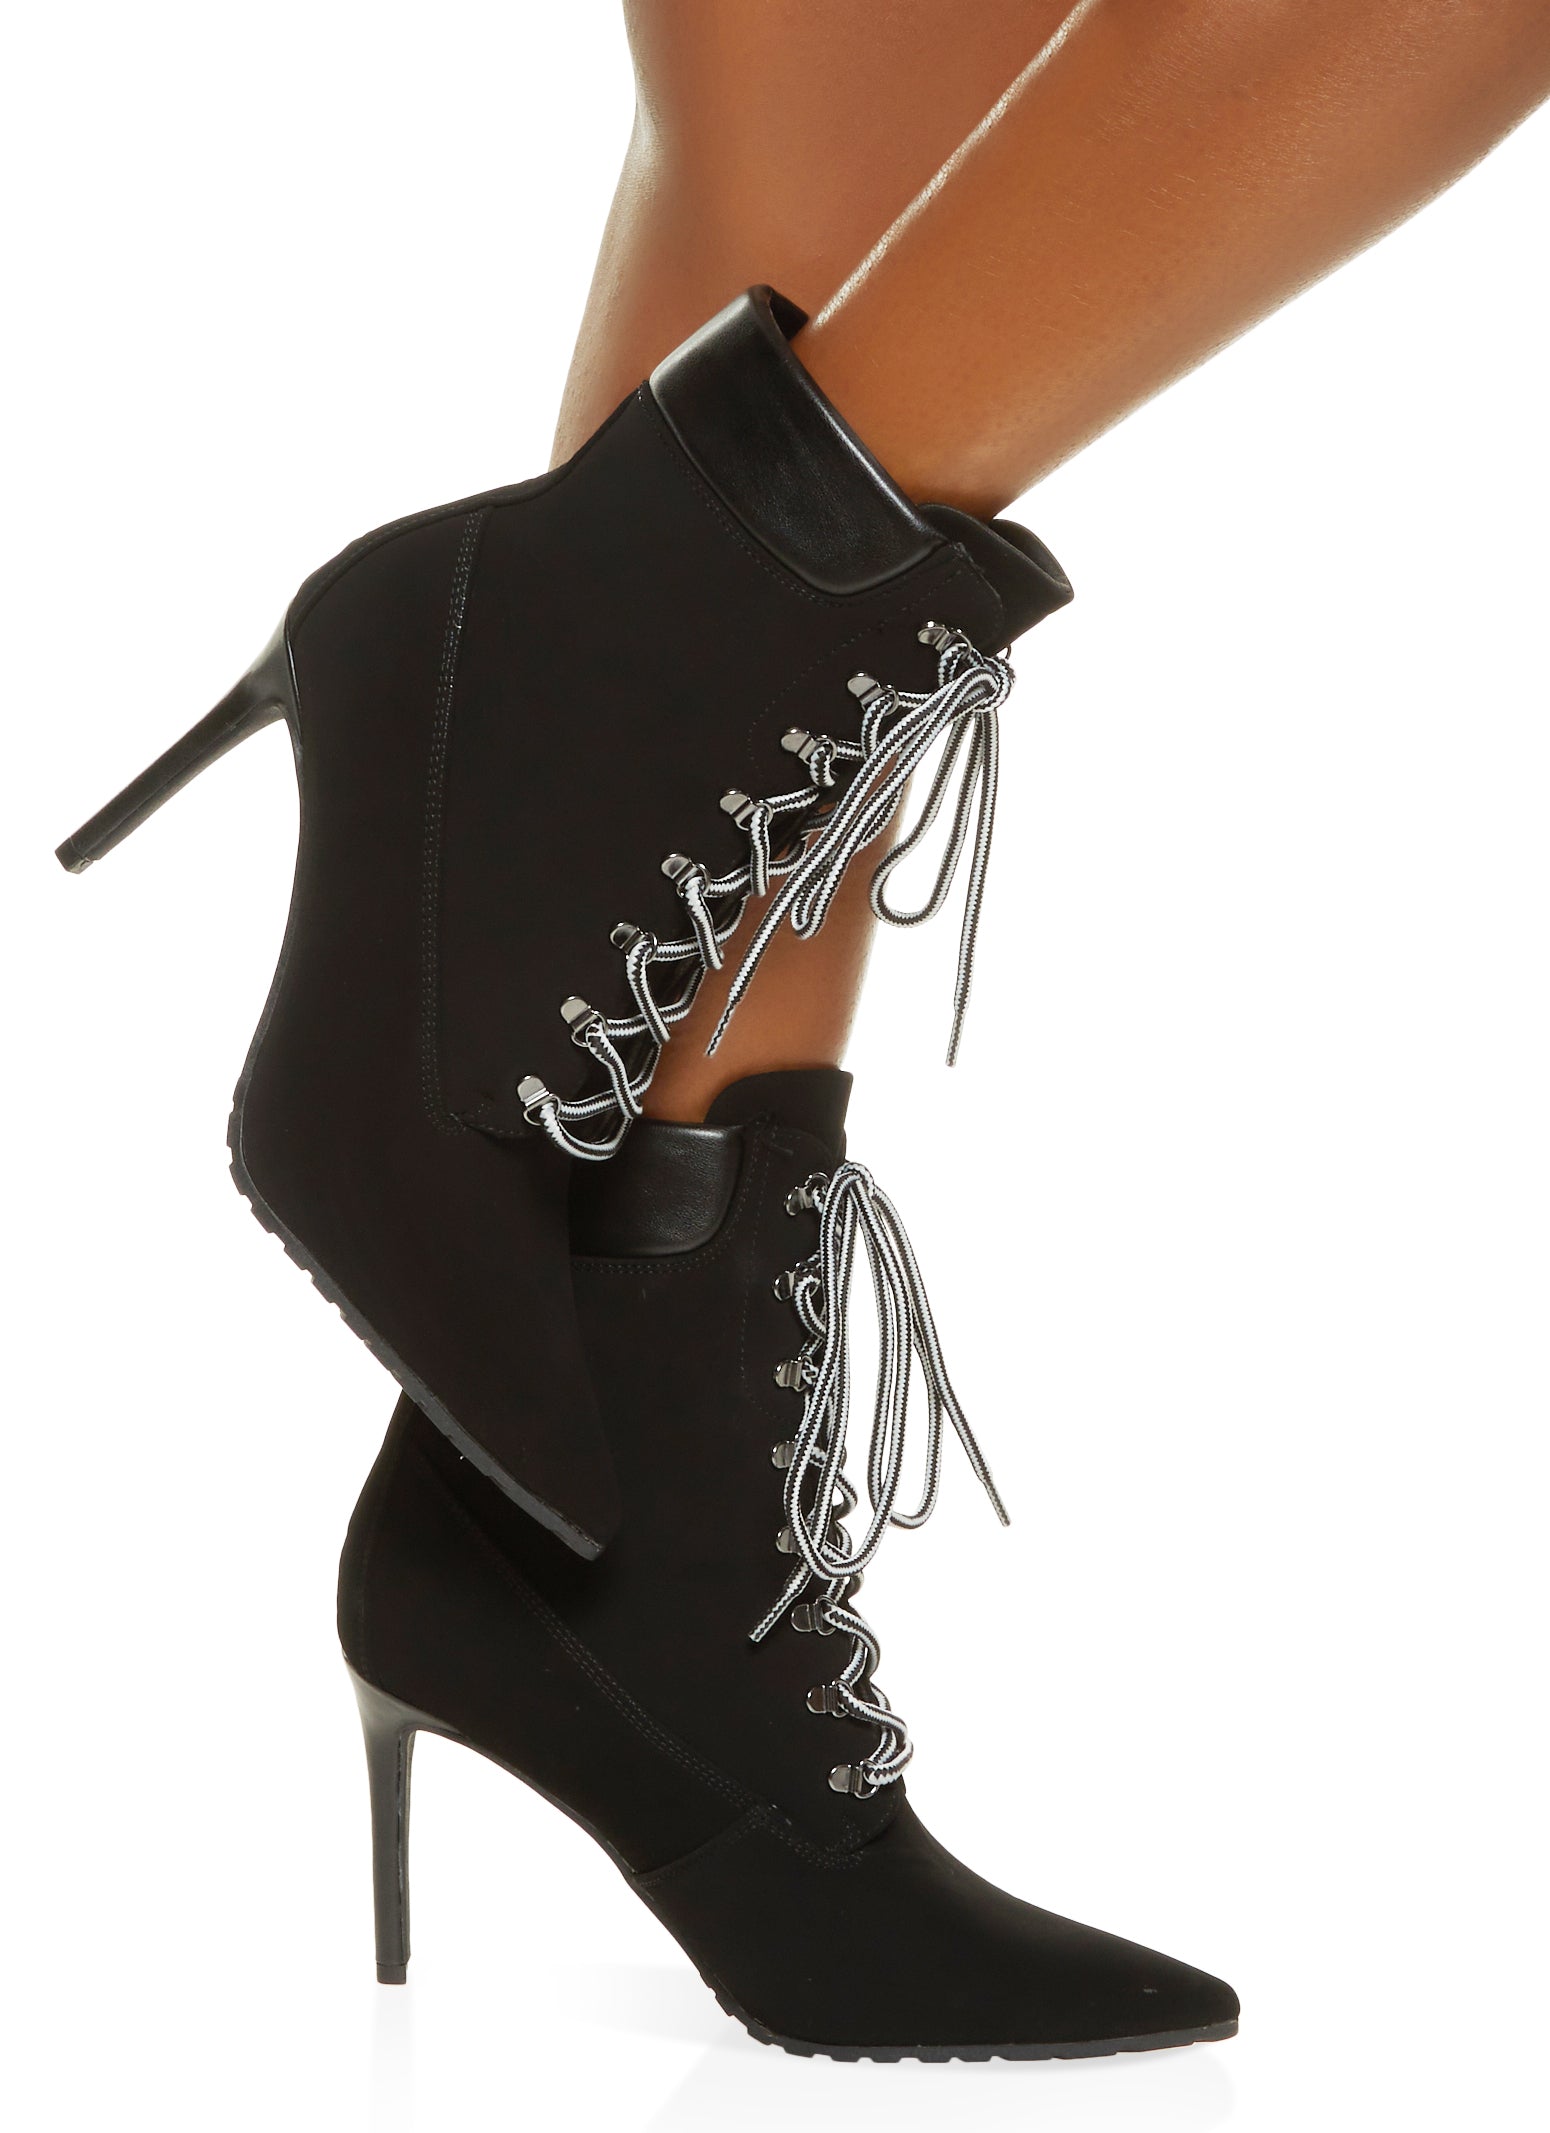 Women's Closed Pointed Toe Chain Studded Stiletto Ankle Boots Red Bottom  Heels